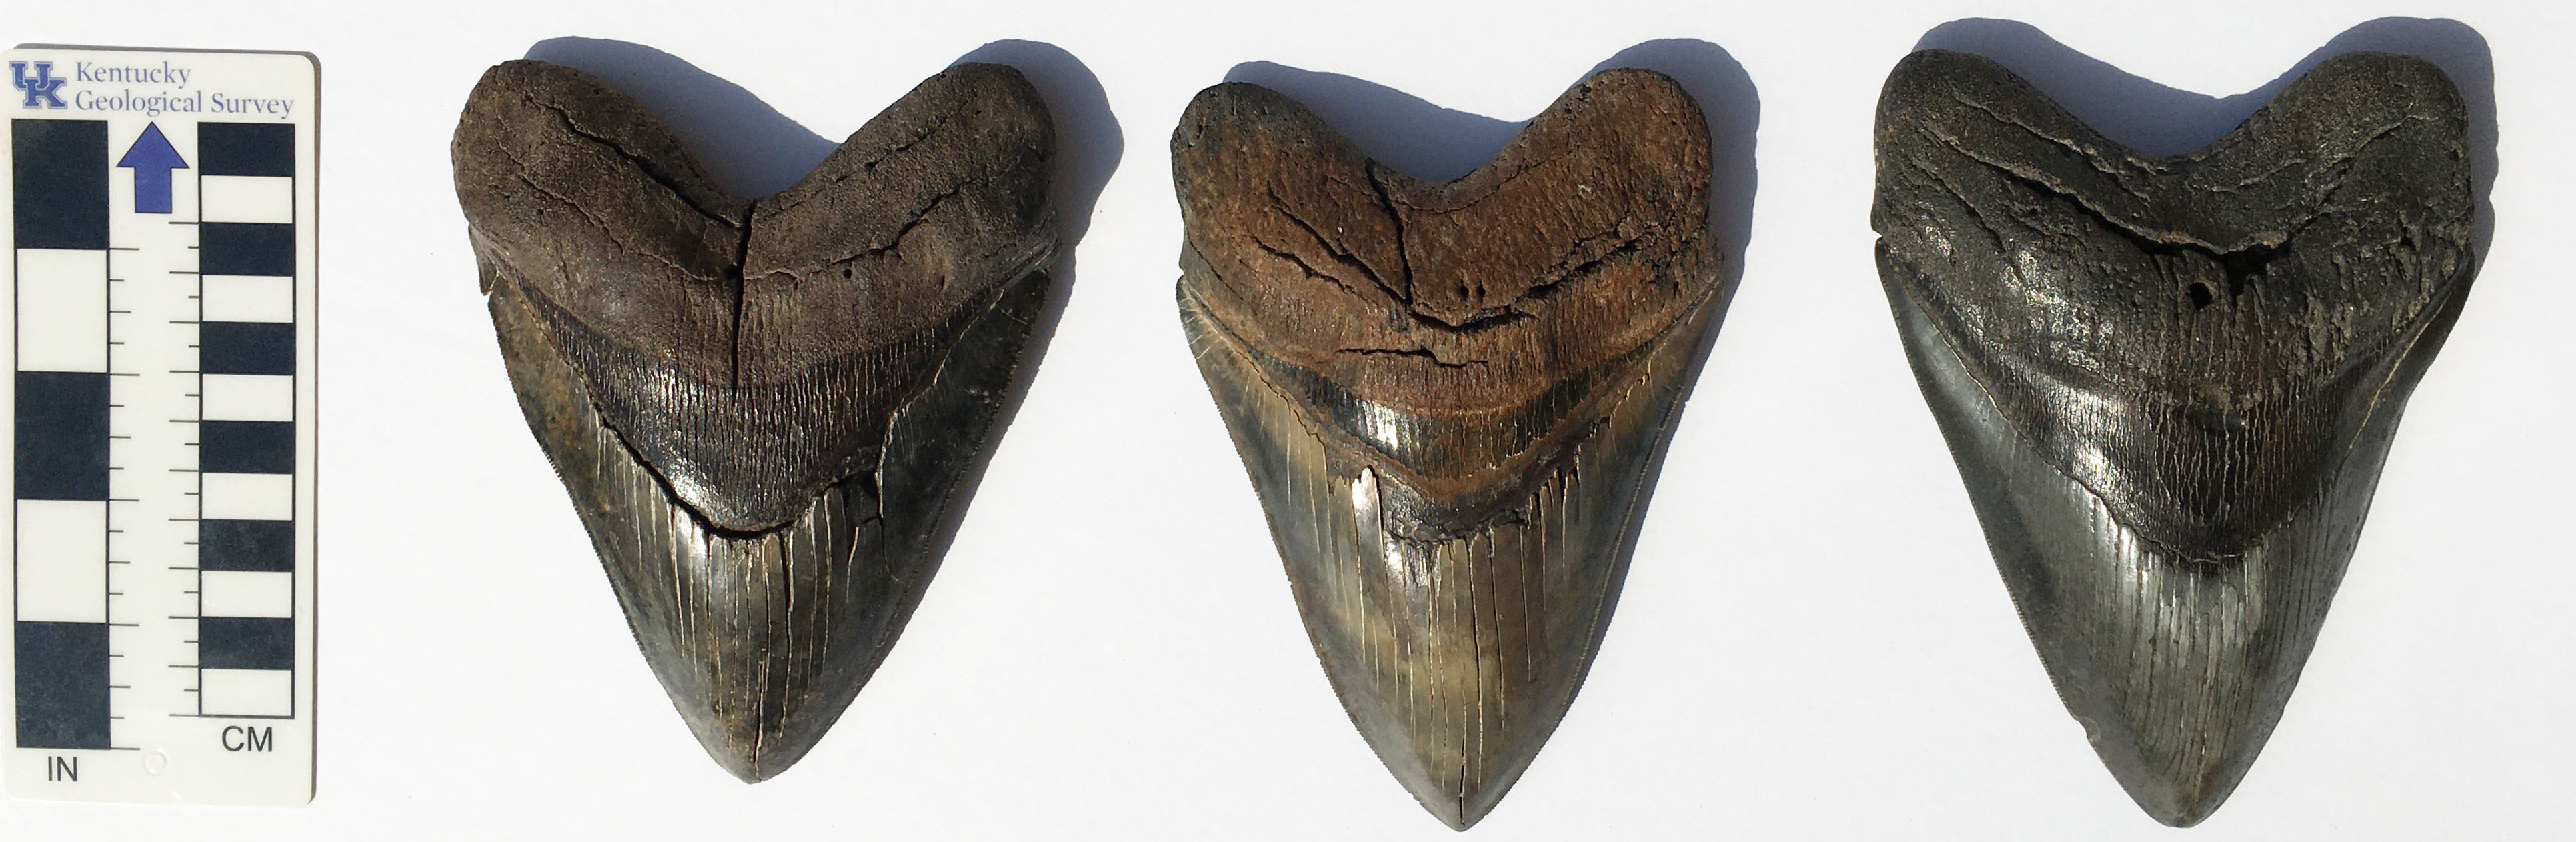 Large megalodon teeth from Miocene deposits of the southeastern United States.